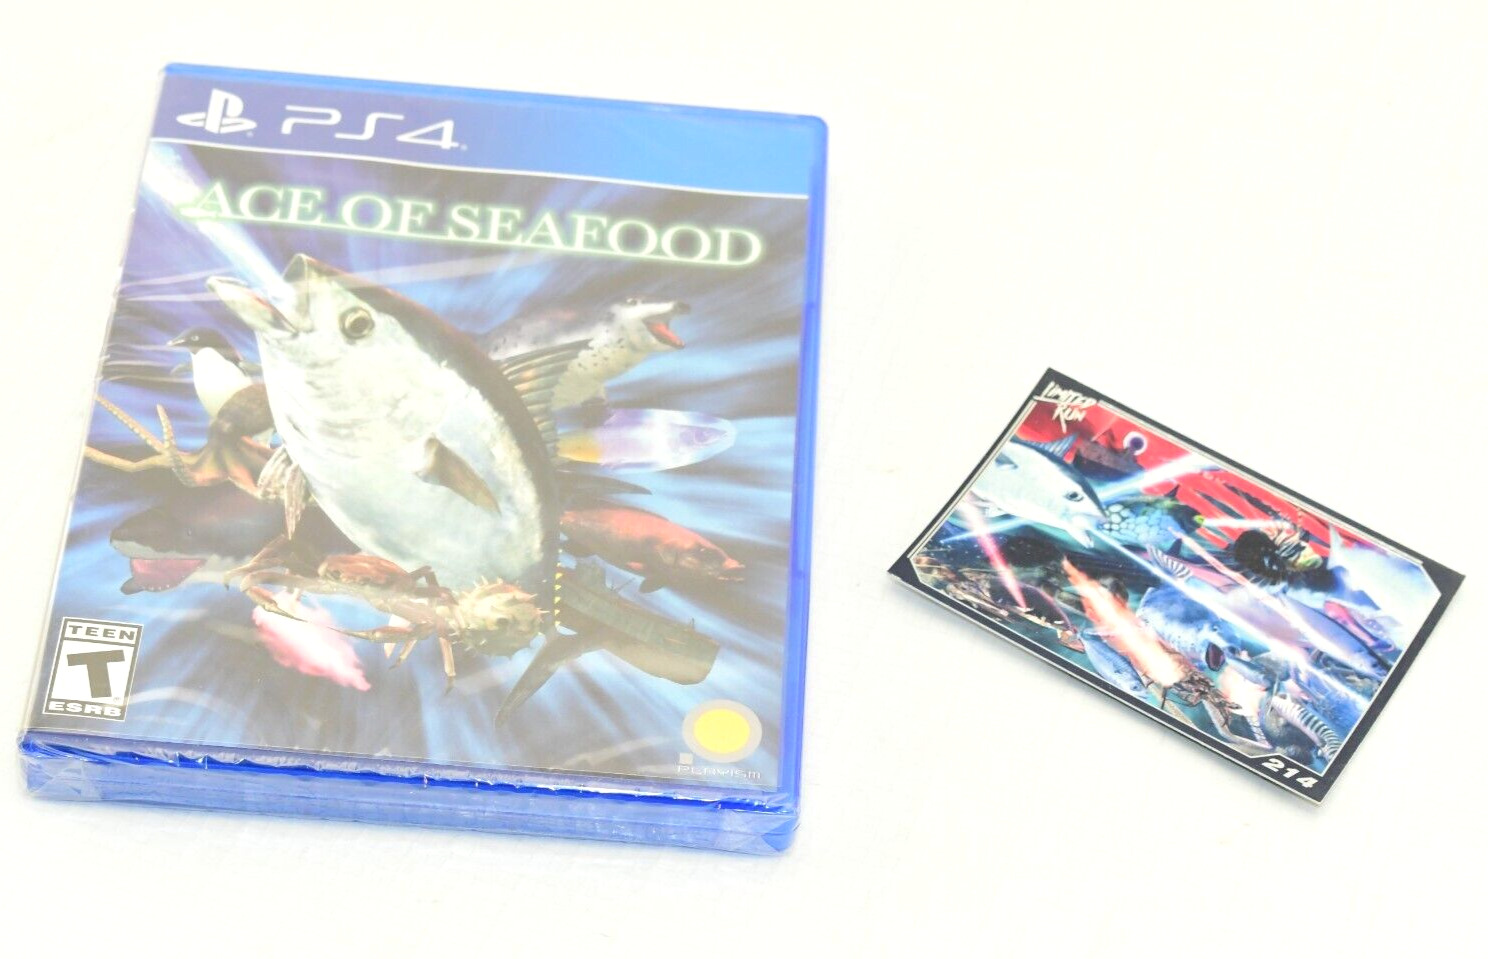 Ace of Seafood (Playstation 4, PS4) Limited Run Games LRG #142 w/ CARD FAST SHIP